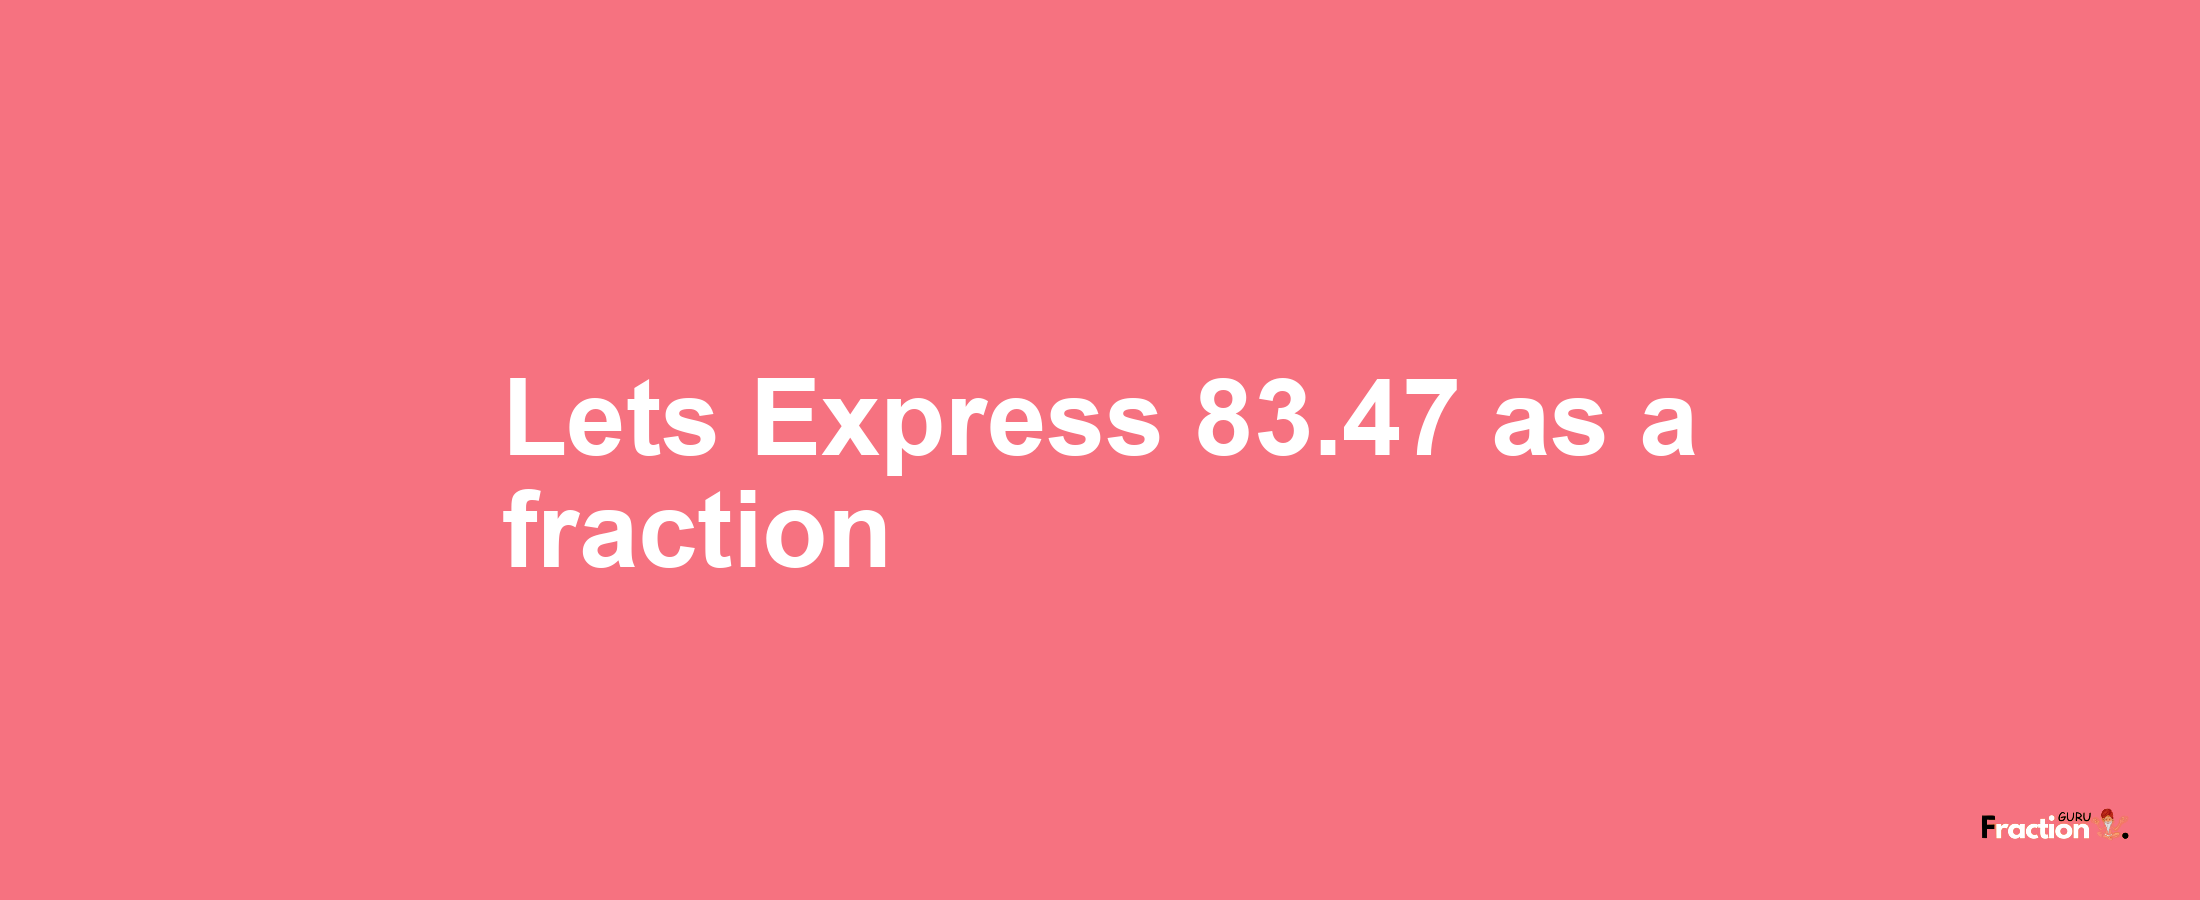 Lets Express 83.47 as afraction